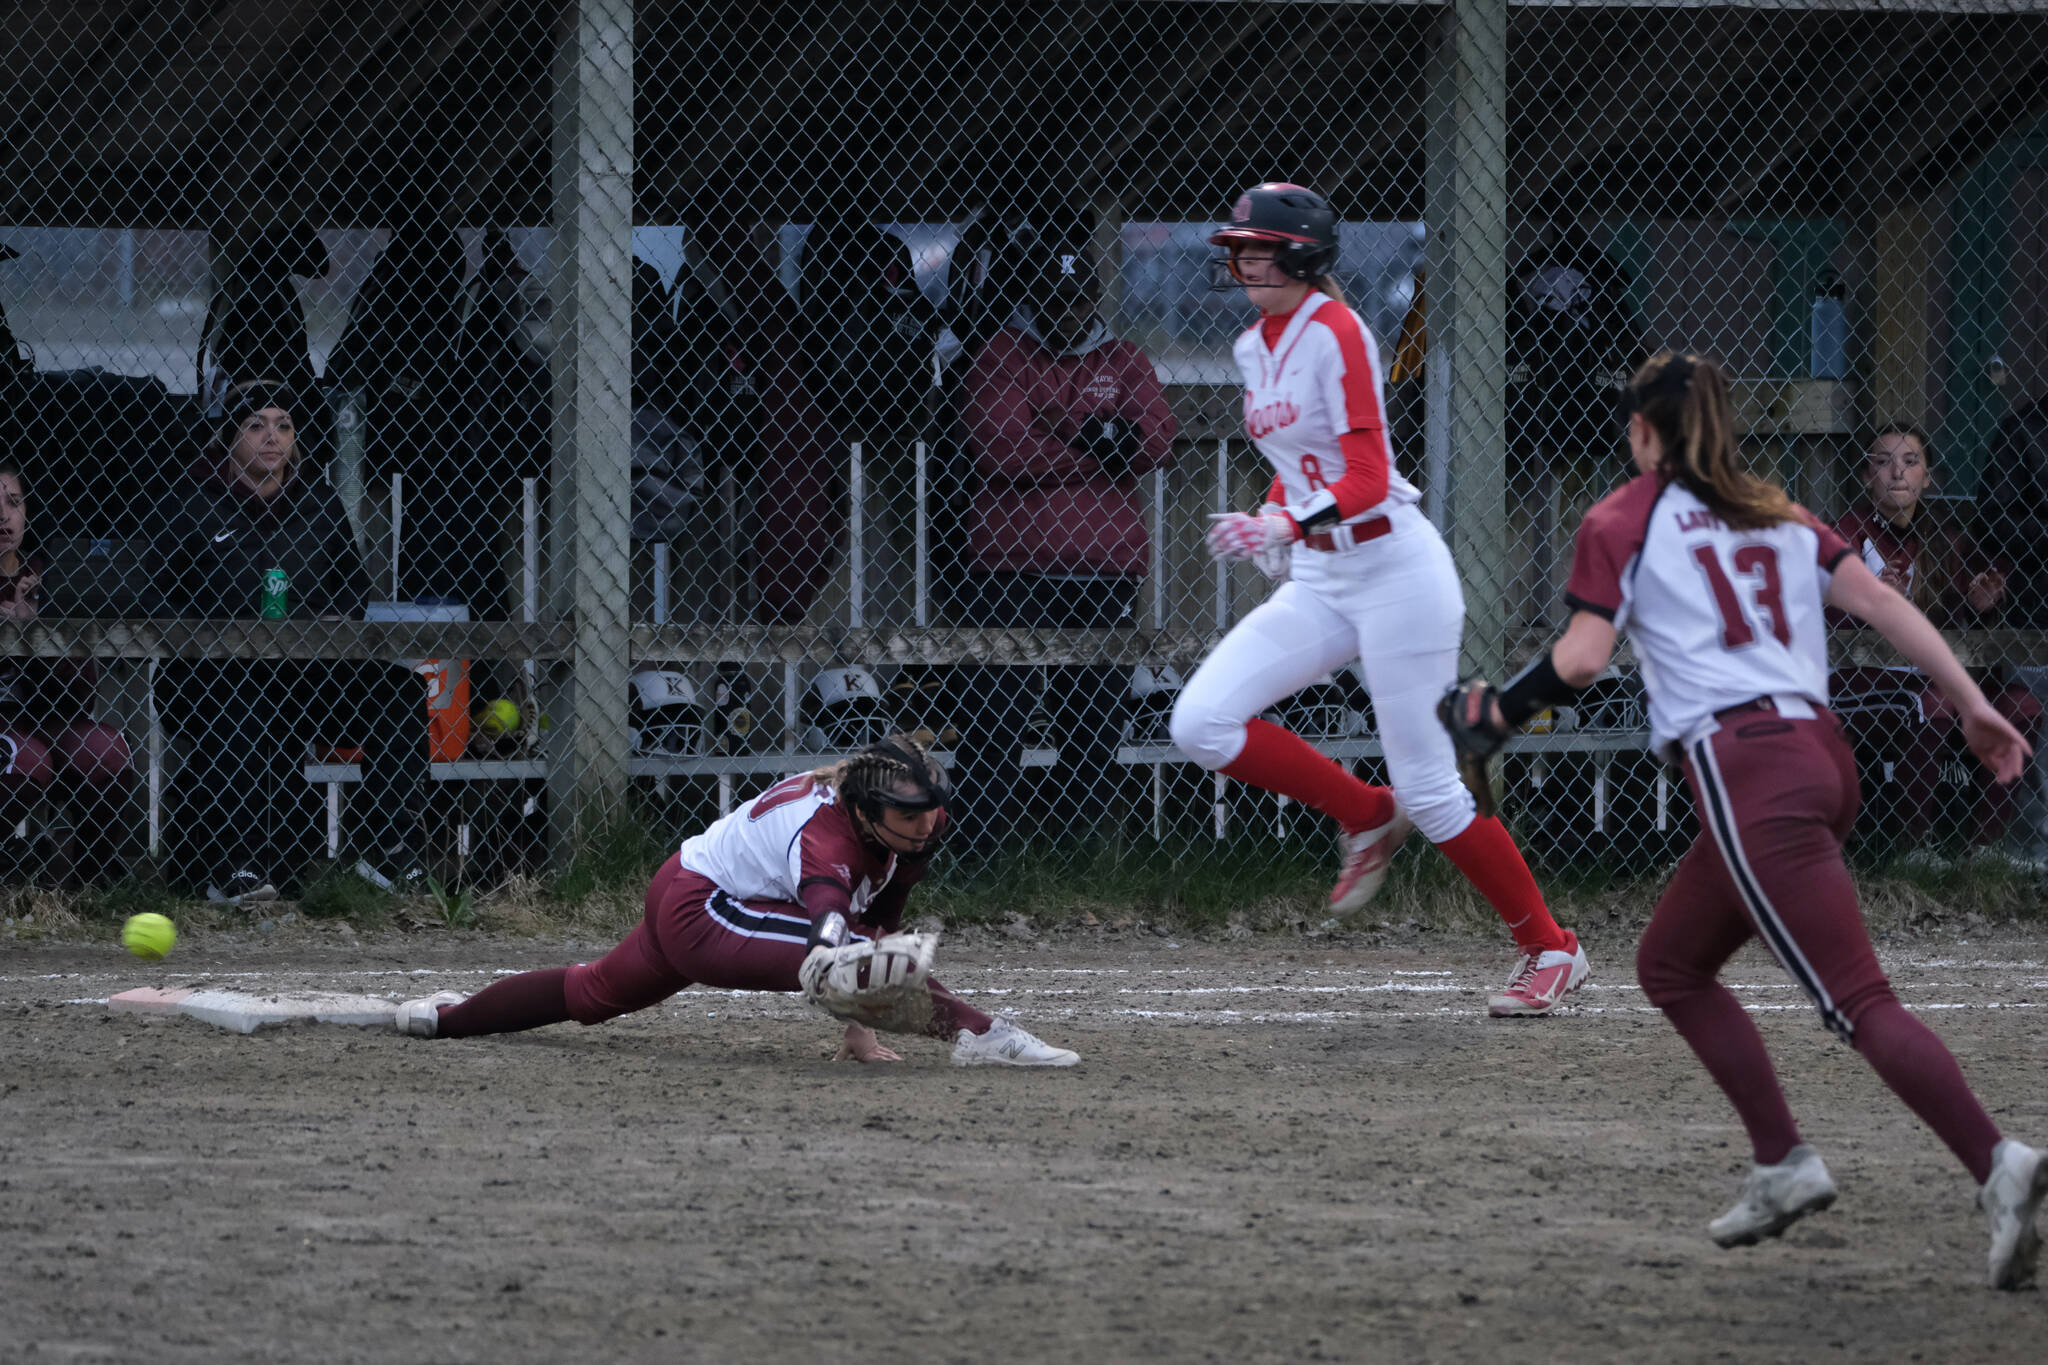 Juneau-Douglas High School: Yadaa.at Kalé junior Mila Hargrave (8) is safe at first as Ketchikan junior Rylie Welk misses the ball during the Crimson Bears and Lady Kings tie on Thursday at Melvin Park. (Klas Stolpe / Juneau Empire)